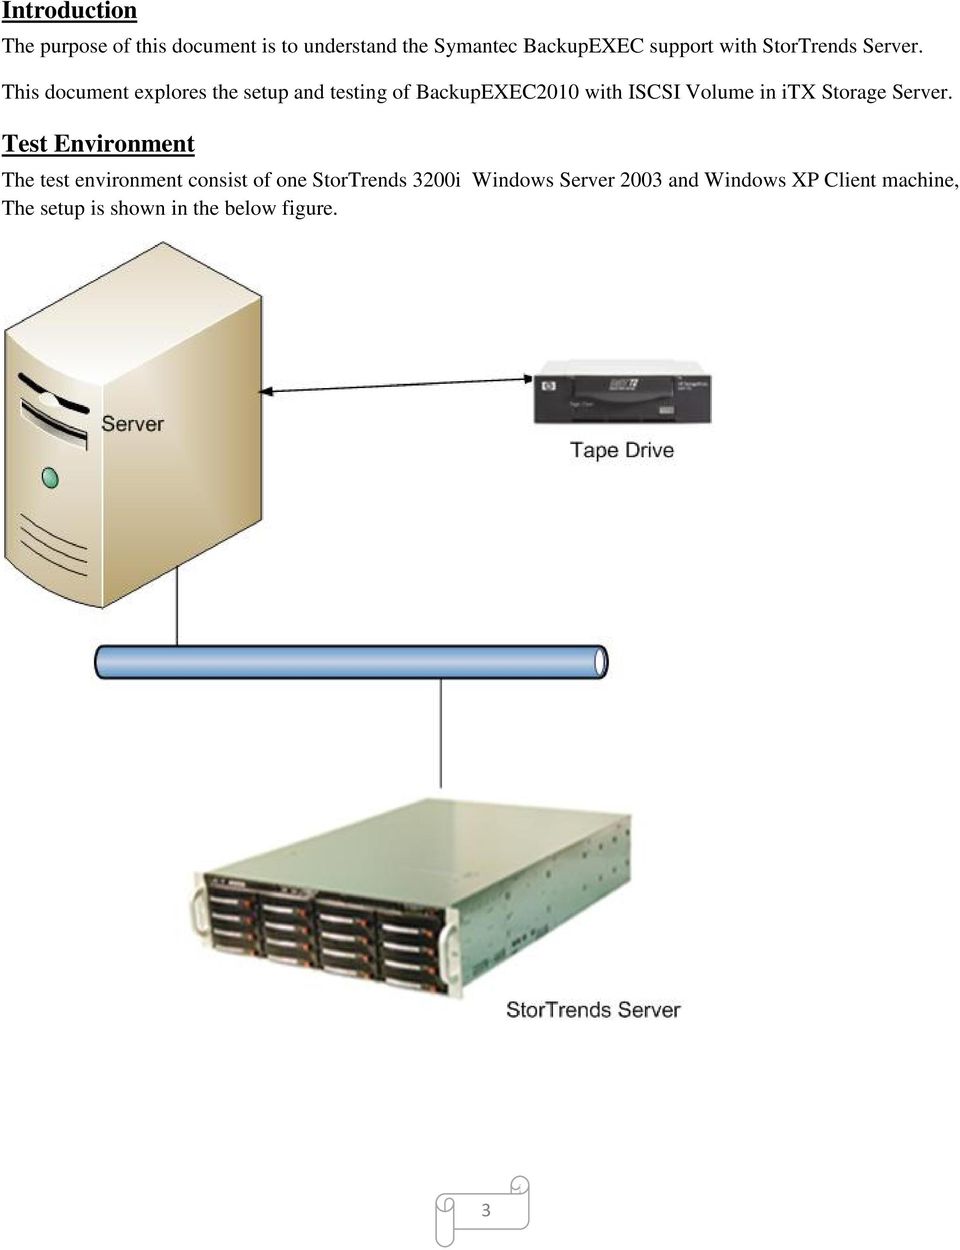 This document explores the setup and testing of BackupEXEC2010 with ISCSI Volume in itx Storage